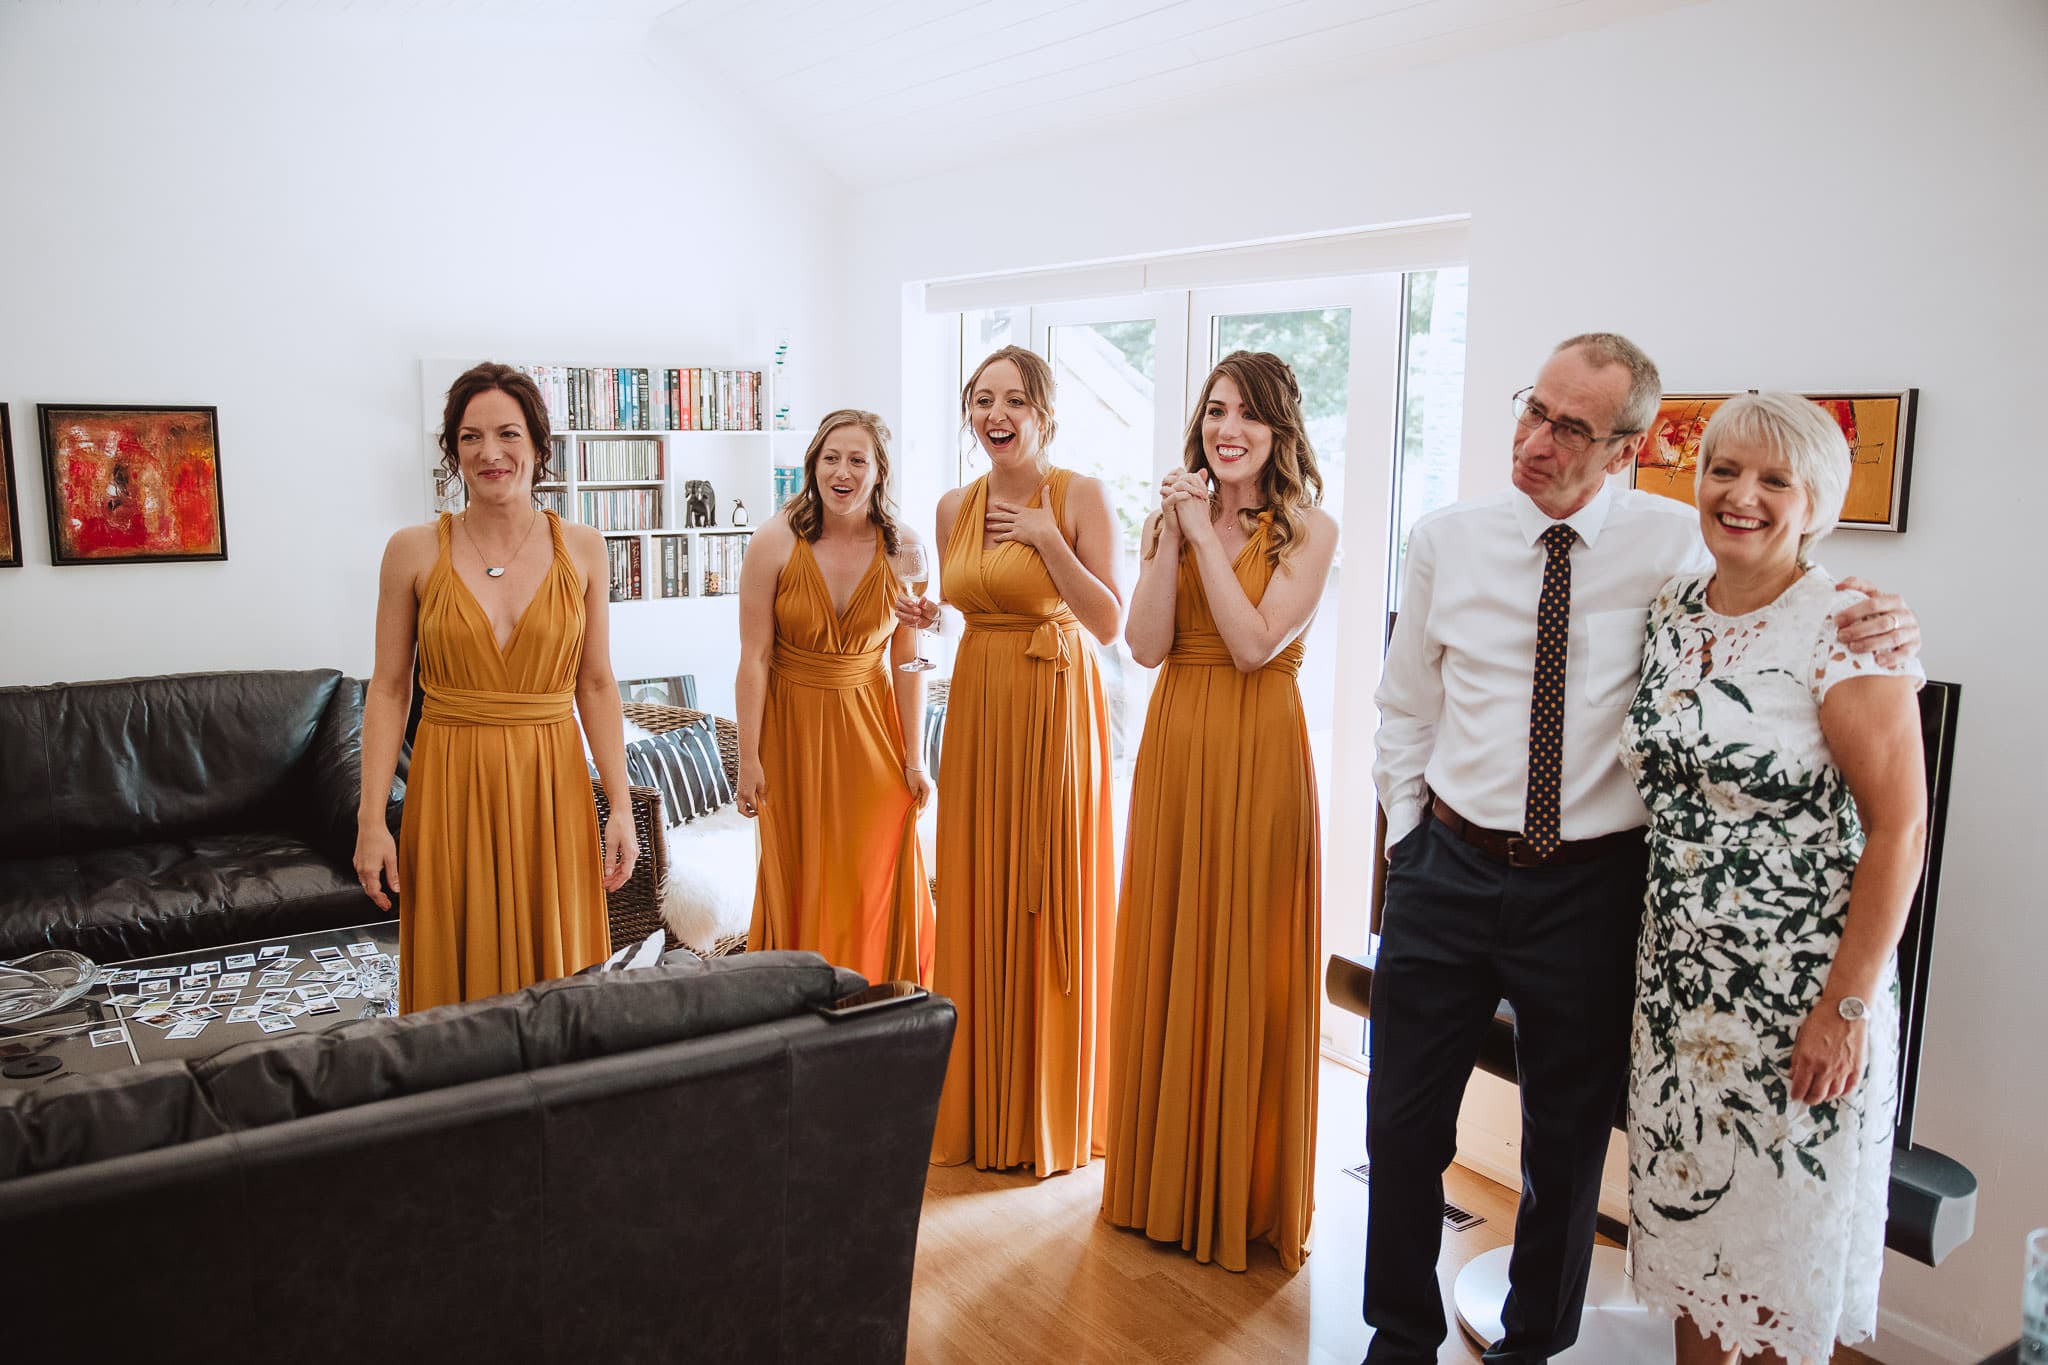 happy bridesmaids wearing mustard dresses and reacting to seeing the bride's dress